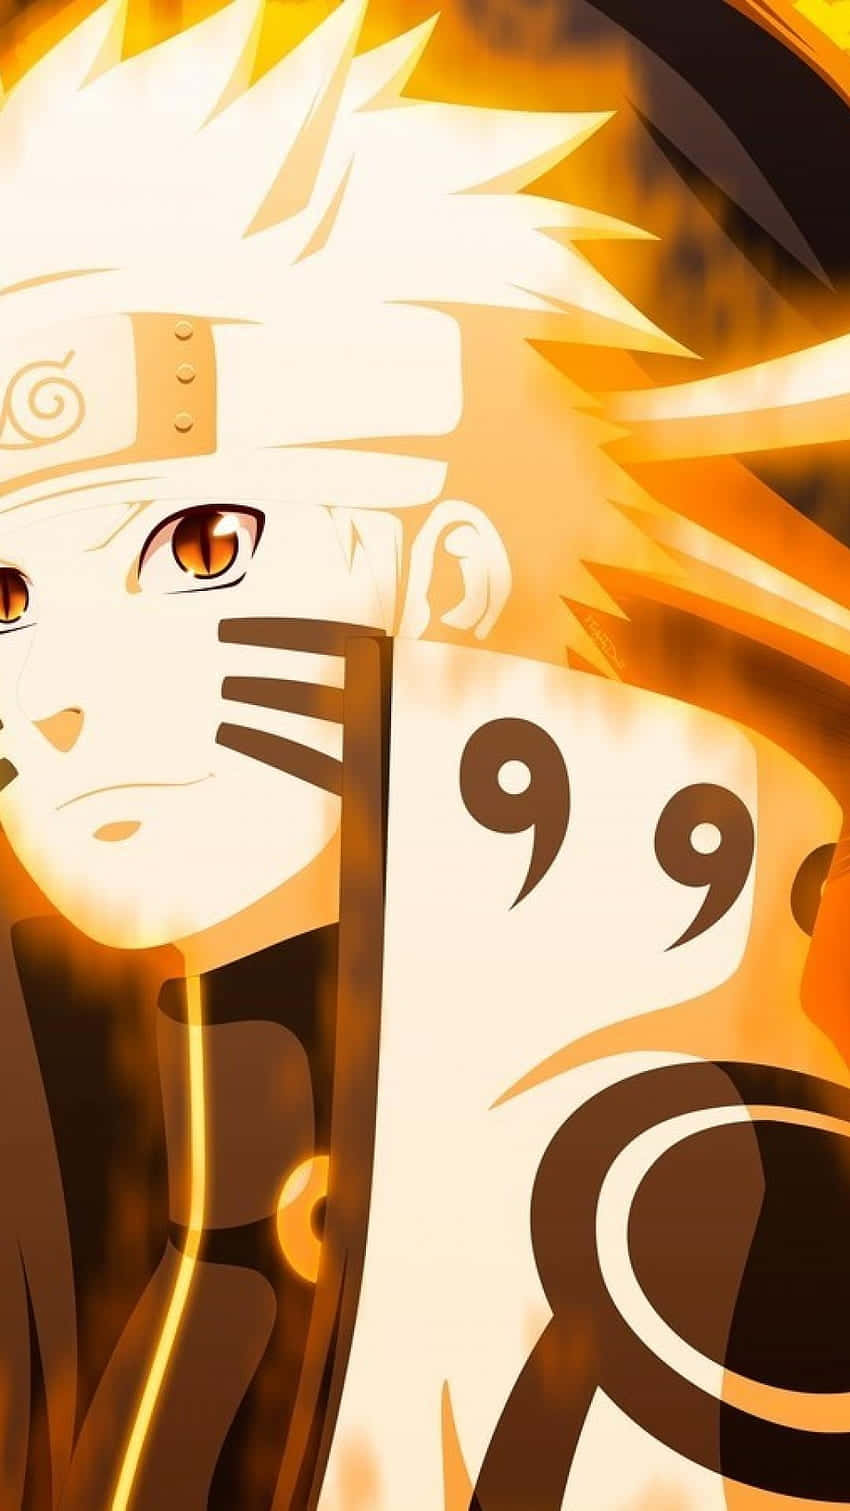 Unleash the power of your Naruto Shippuden iPhone Wallpaper